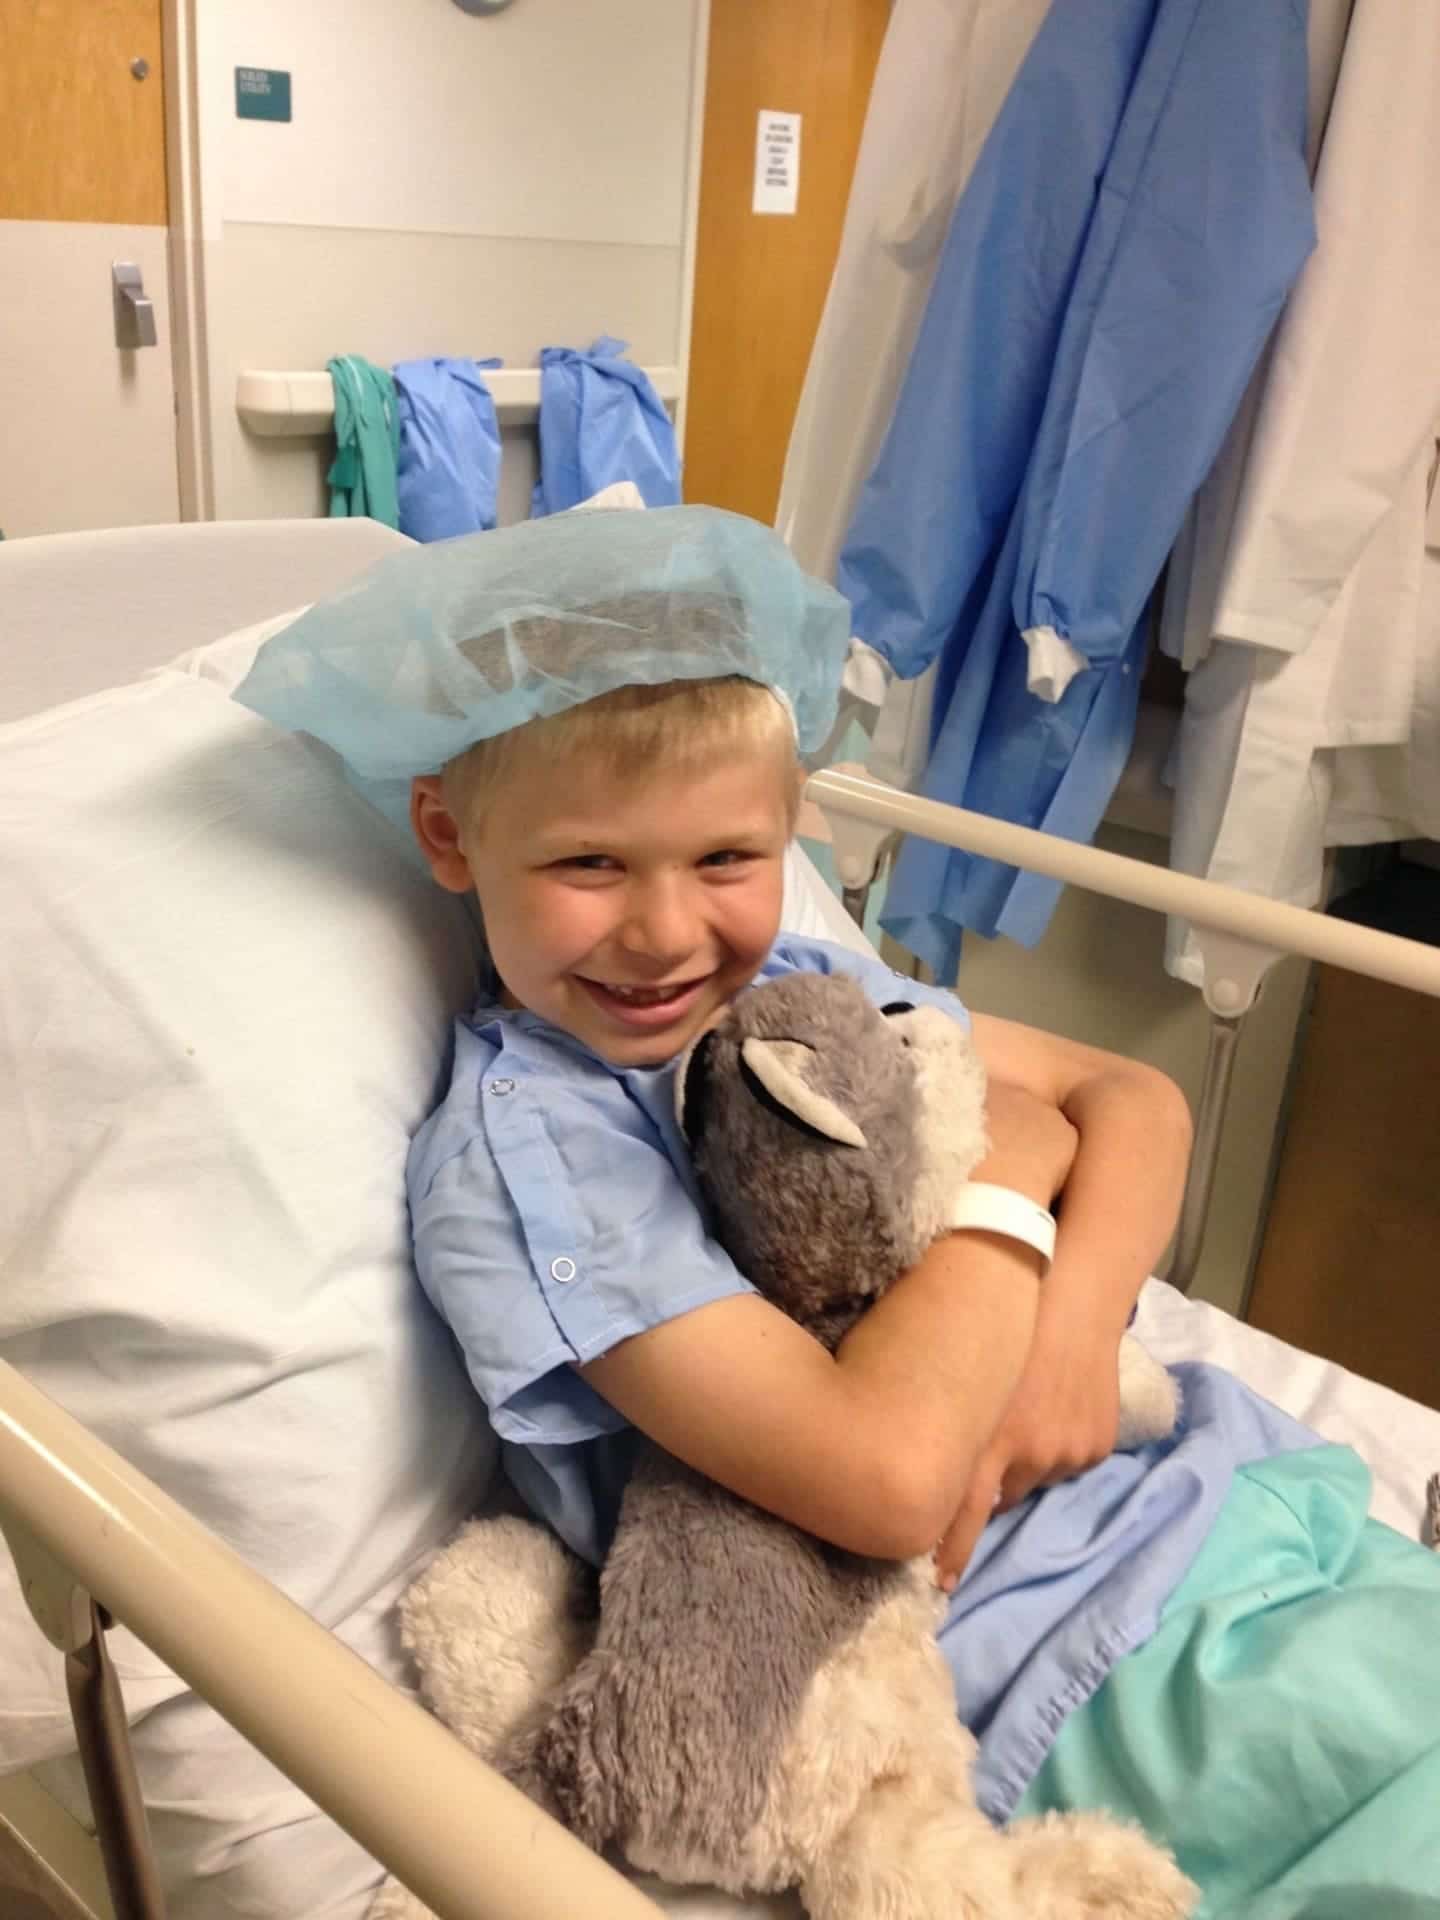 Child wearing hospital gown